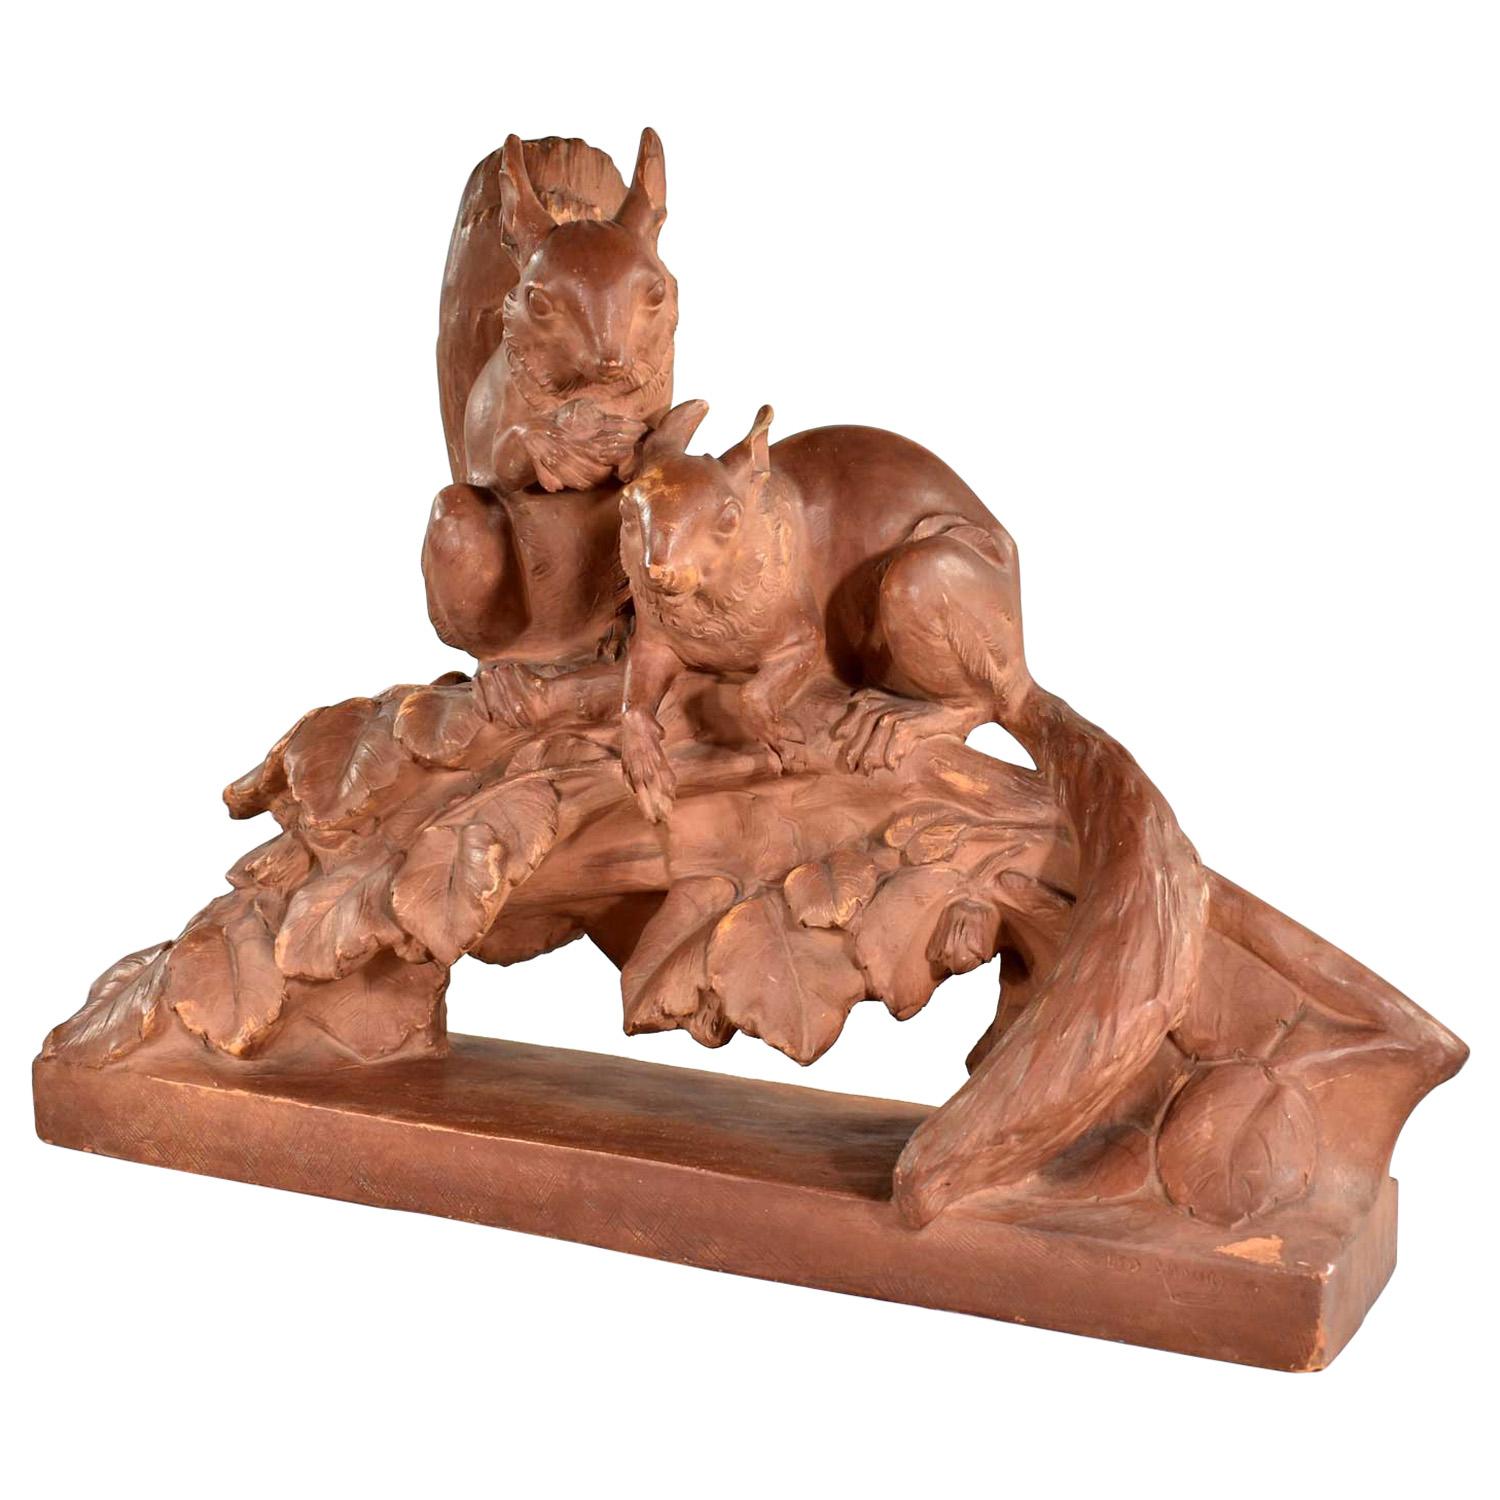 Terracotta Life-Size Squirrel Sculpture by Leo Amaury & Stamped R D’Arly France